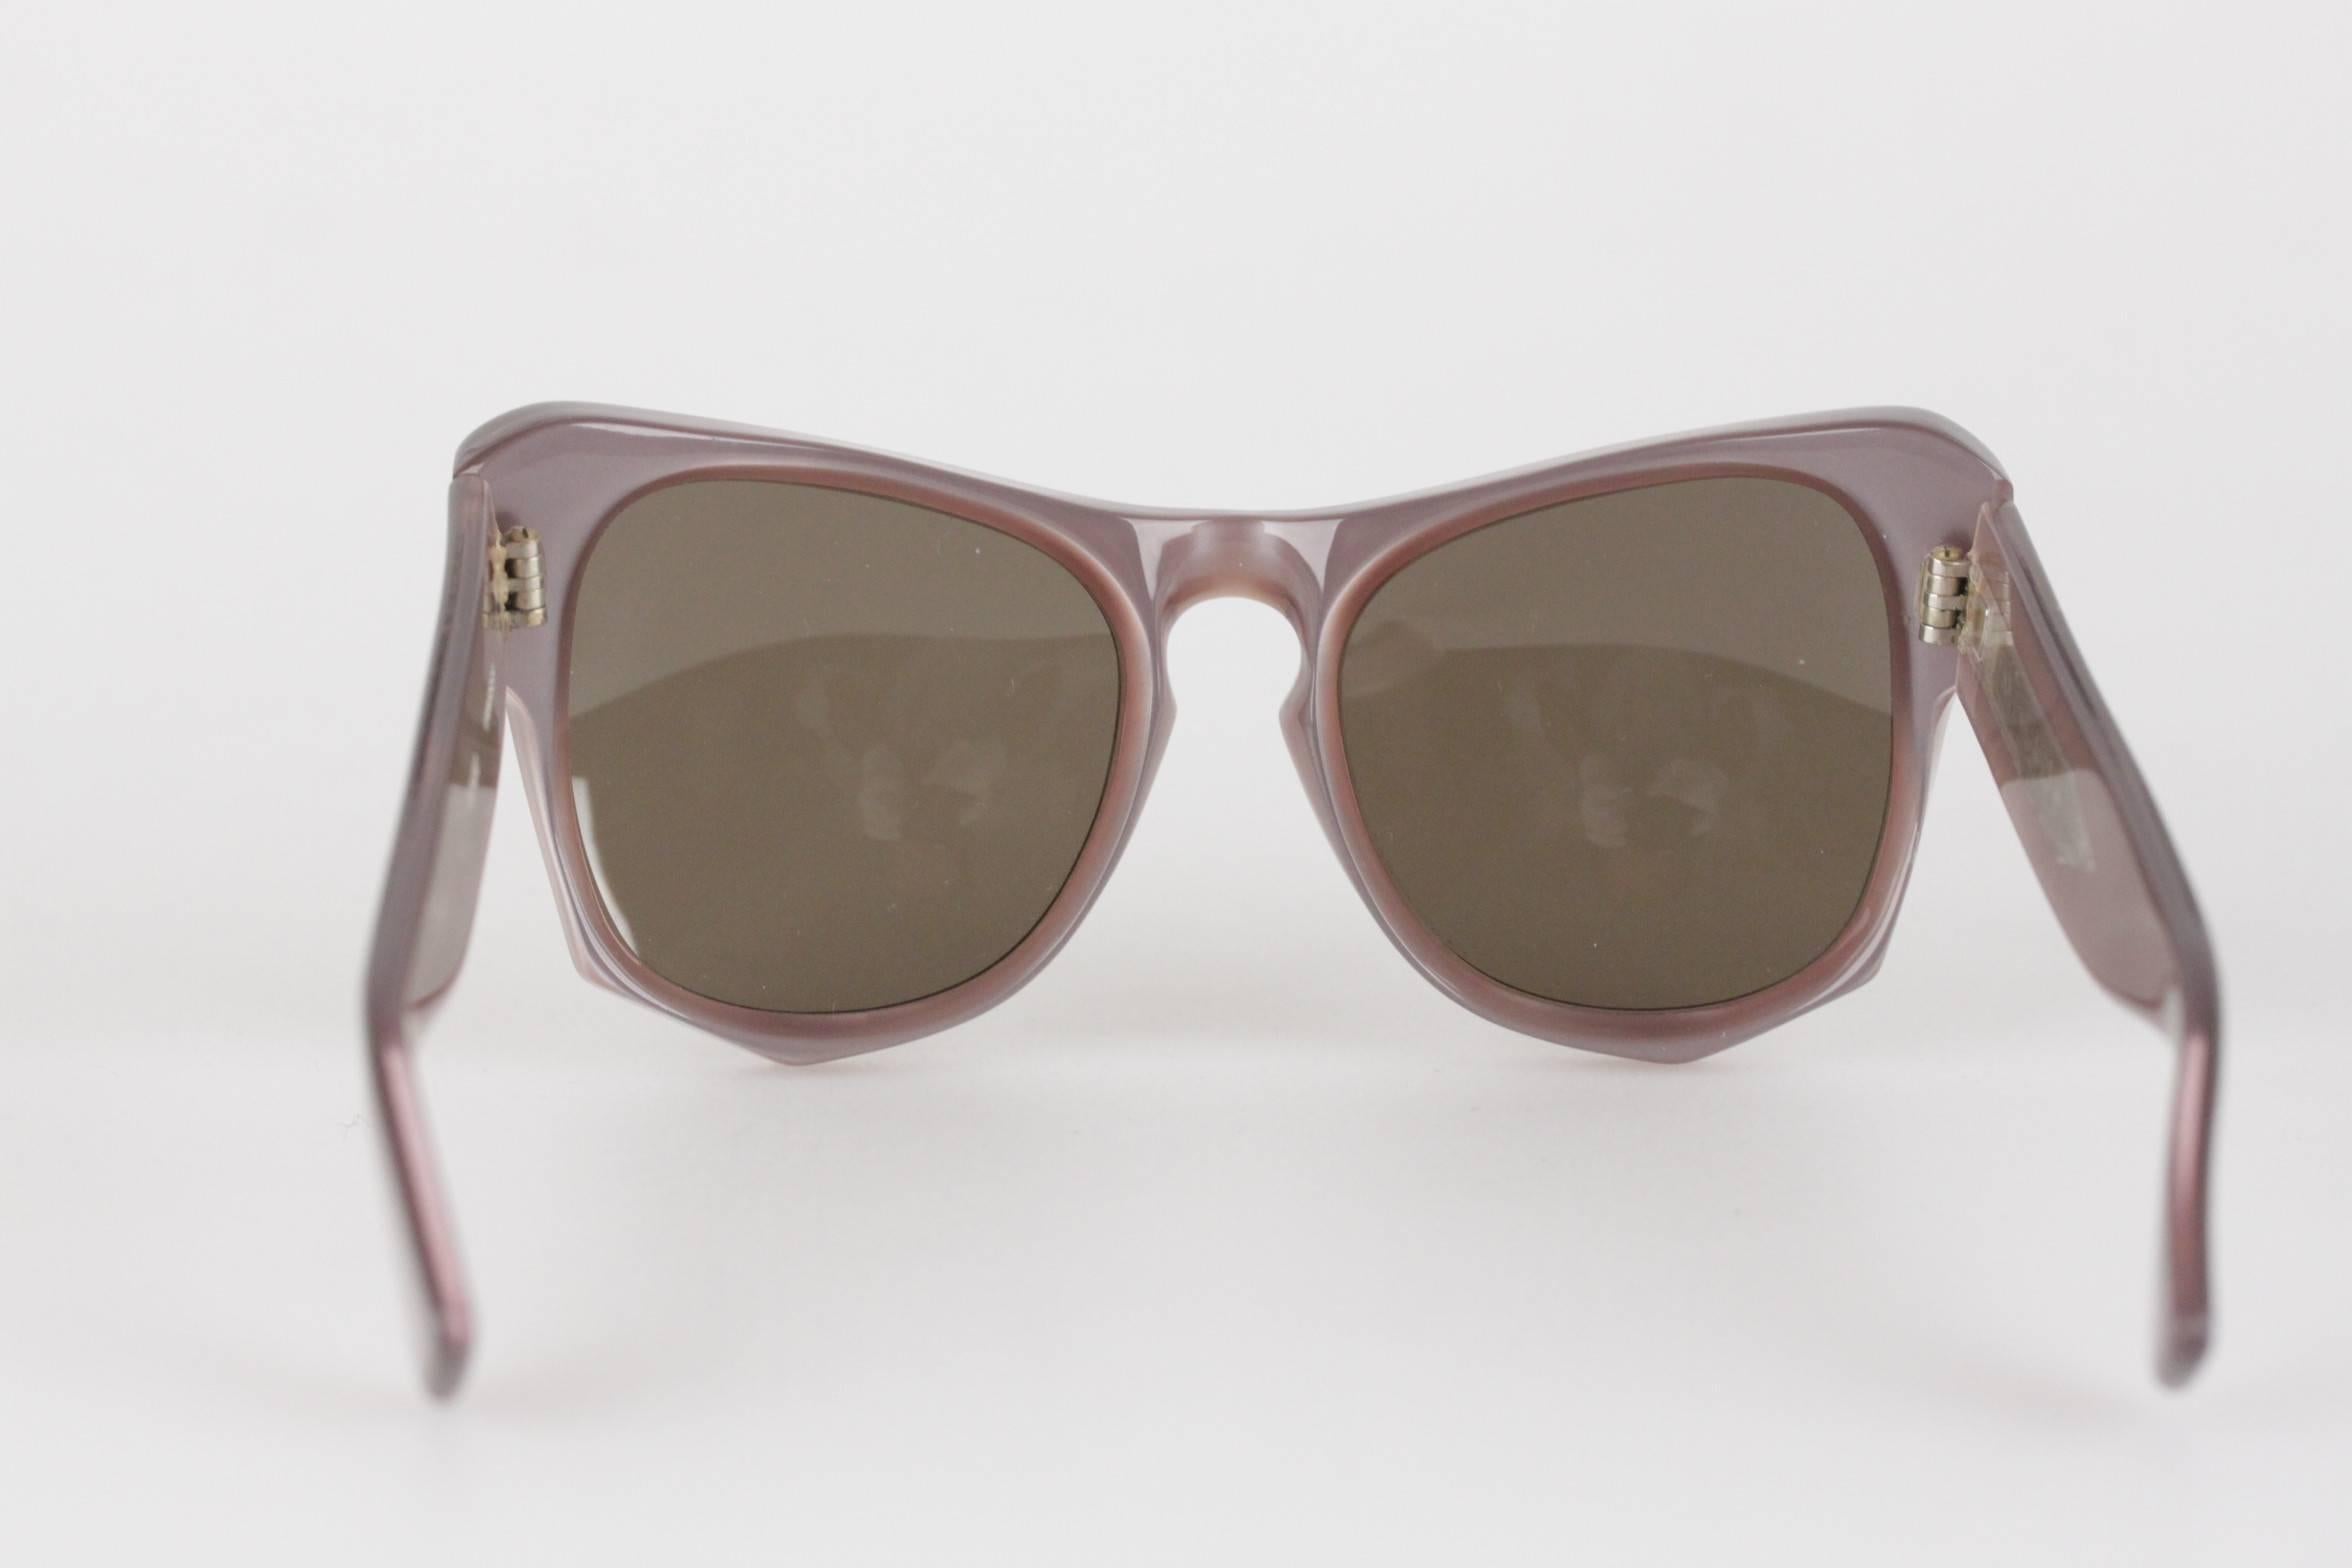 YVES SAINT LAURENT vintage MINT/PRISTINE sunglasses

Mod. VANESSA - Made in France

Perfect frame from the '70s!

GREEN mint lens, brown 